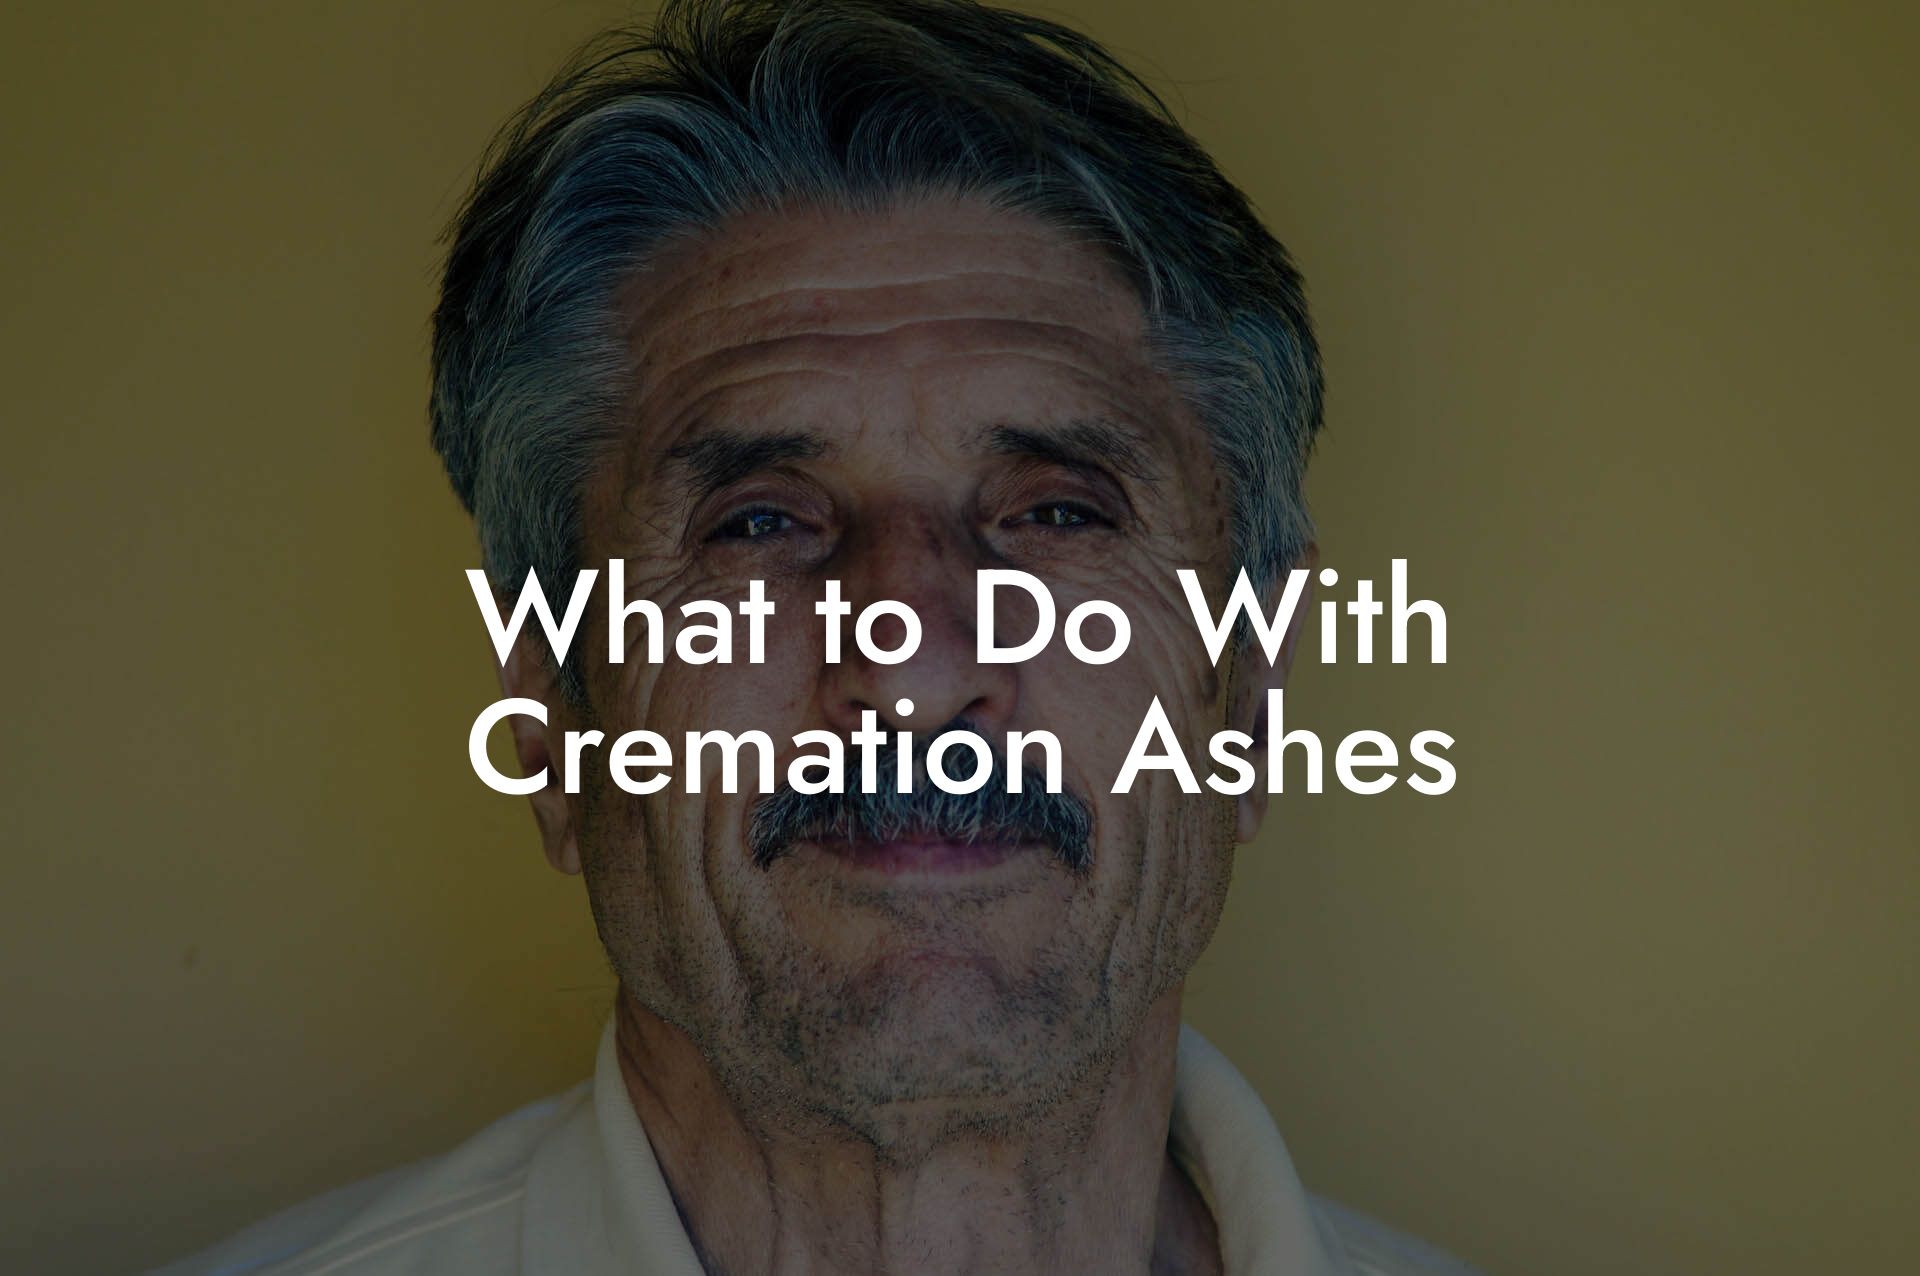 What to Do With Cremation Ashes